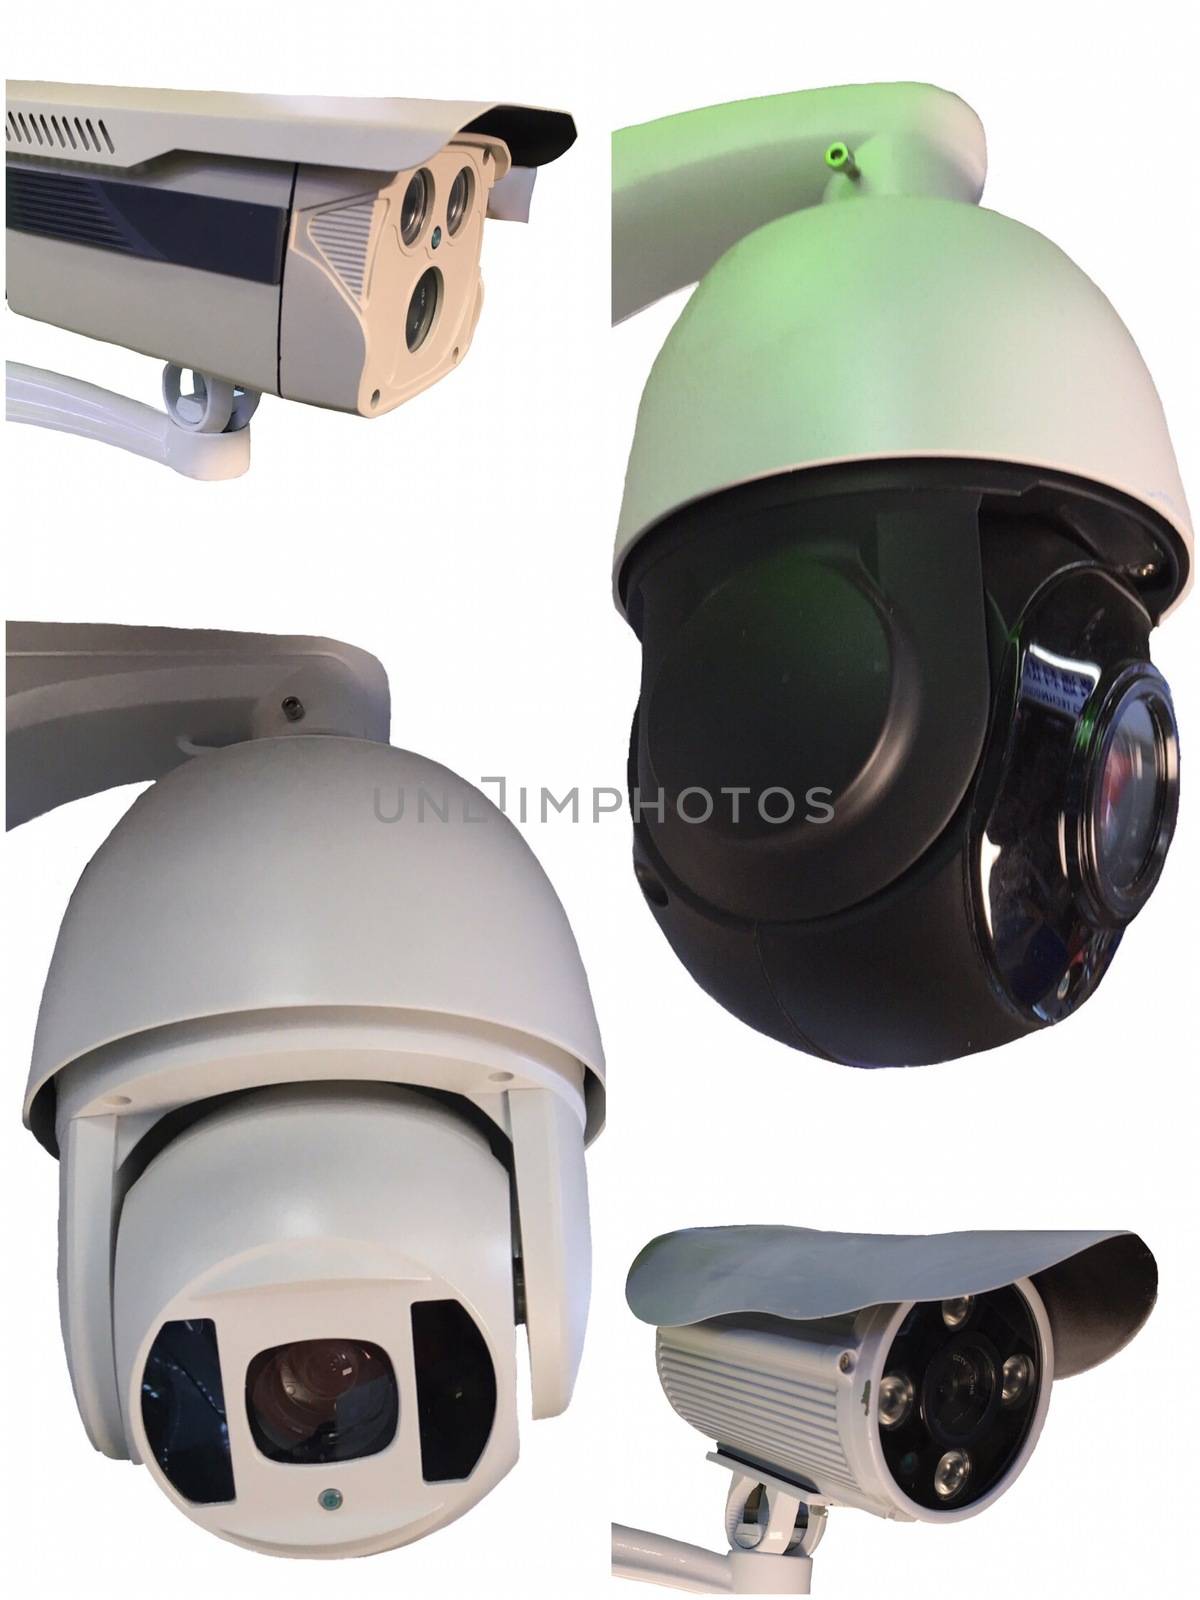 Outdoor CCTV Group of monitoring, security cameras  isolated on white background.